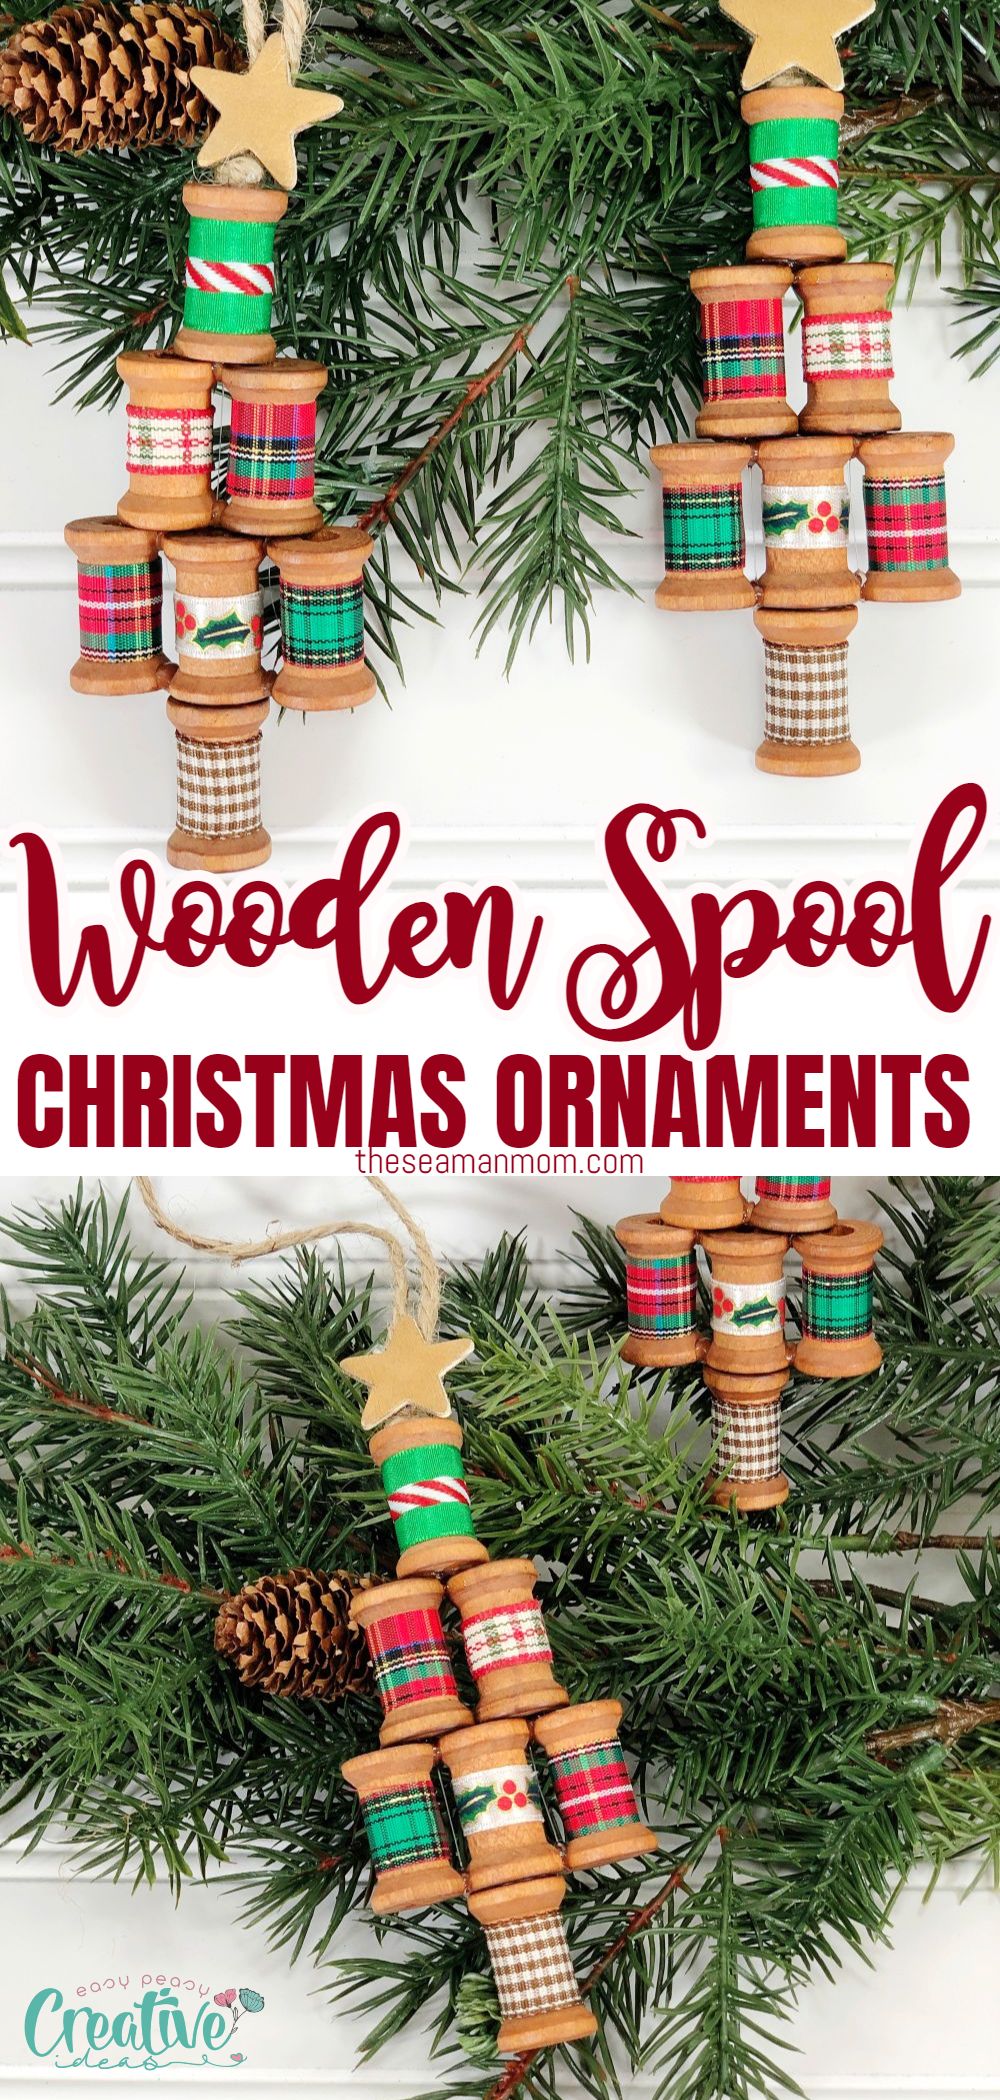 Diy wooden spool Christmas ornaments are an easy and fun Christmas idea for crafters of all levels and ages. These wooden spool ornaments are filled with lots of Christmas cheer, and they make attractive decorations. via @petroneagu